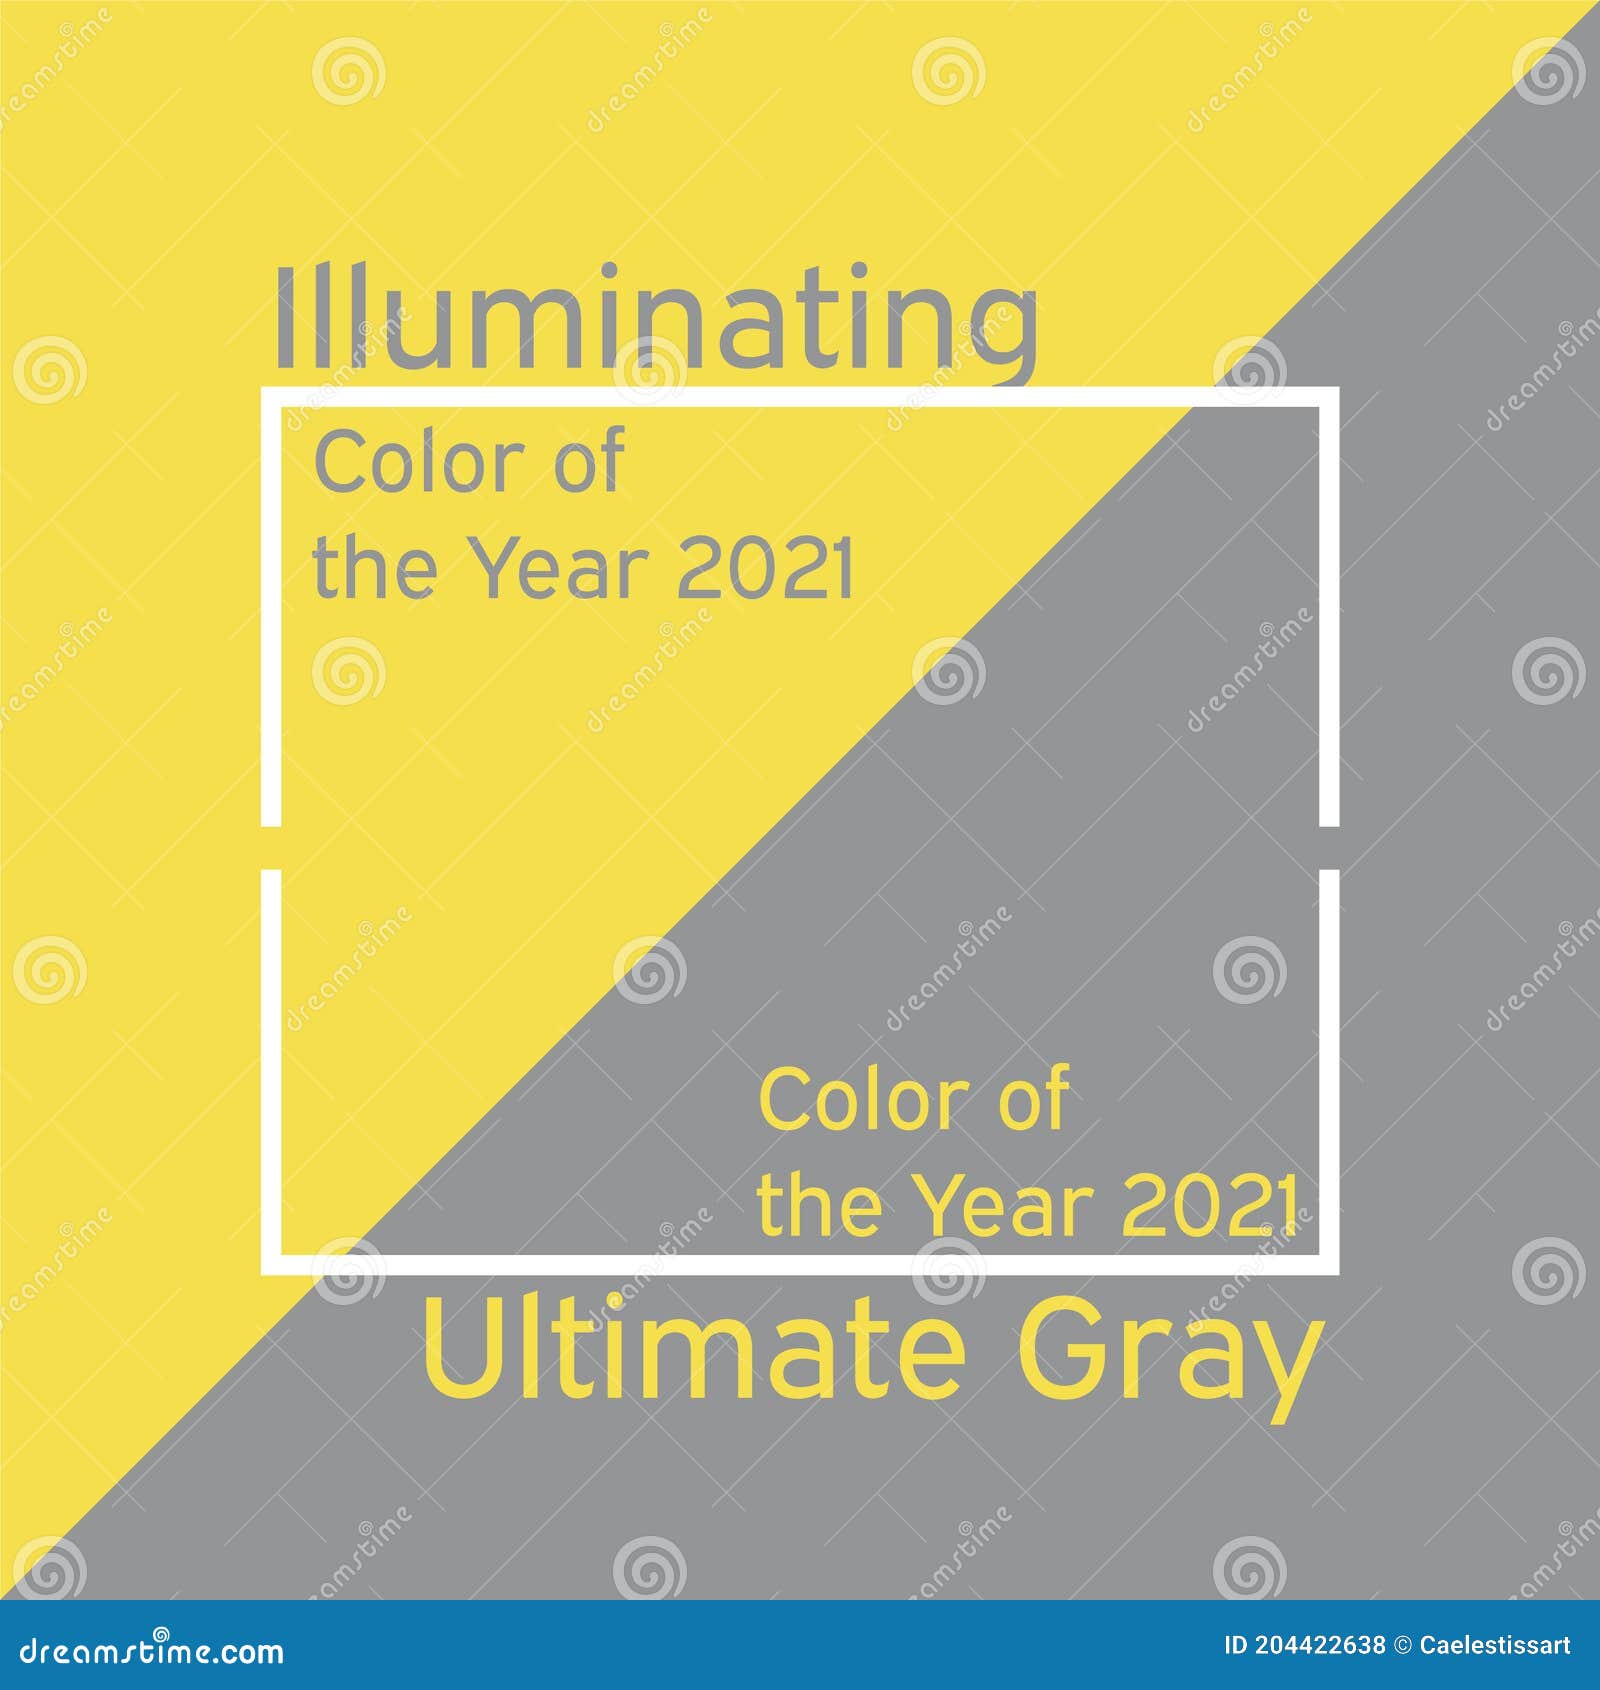 Illuminating, Ultimate Gray - Color of the Year 2021 Editorial Stock ...